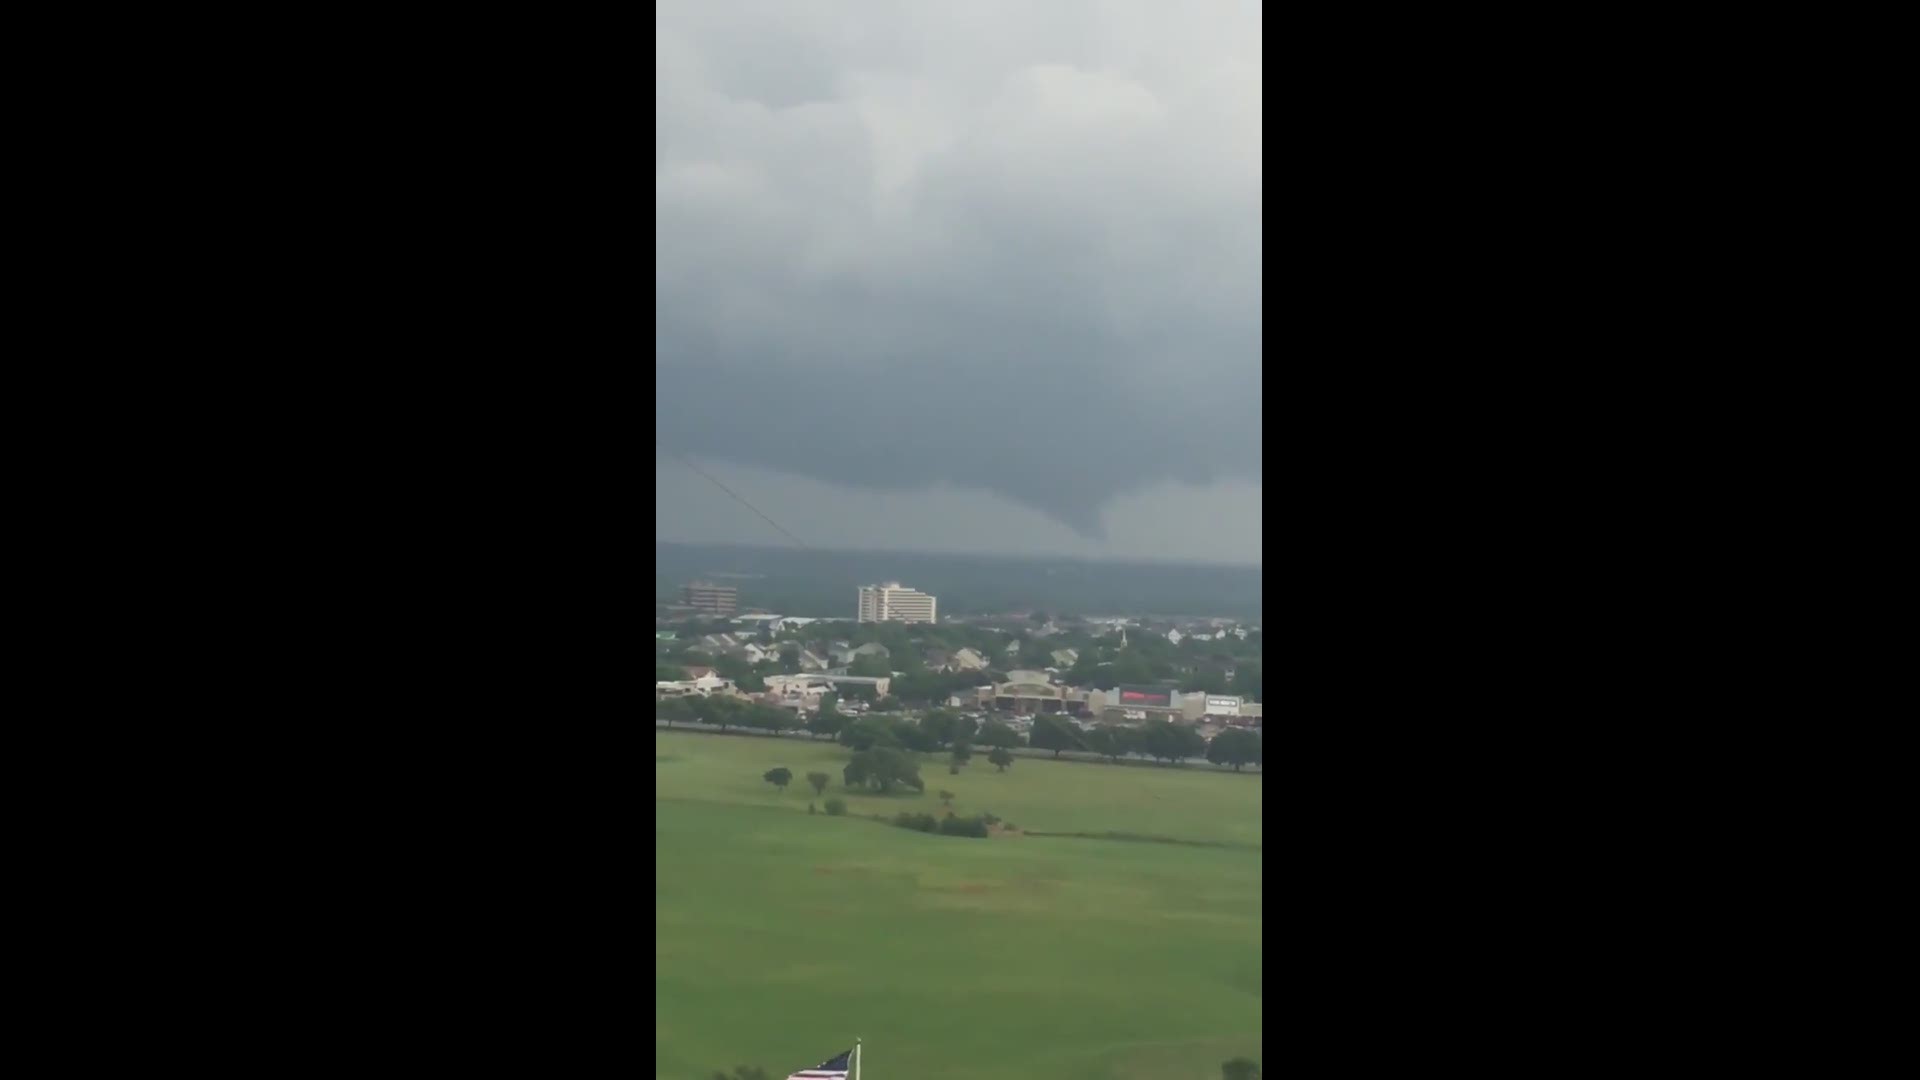 A possible tornado has been reported near Bryan, Texas. This video was sent to KHOU 11 News Wednesday evening from Justin Fierova.